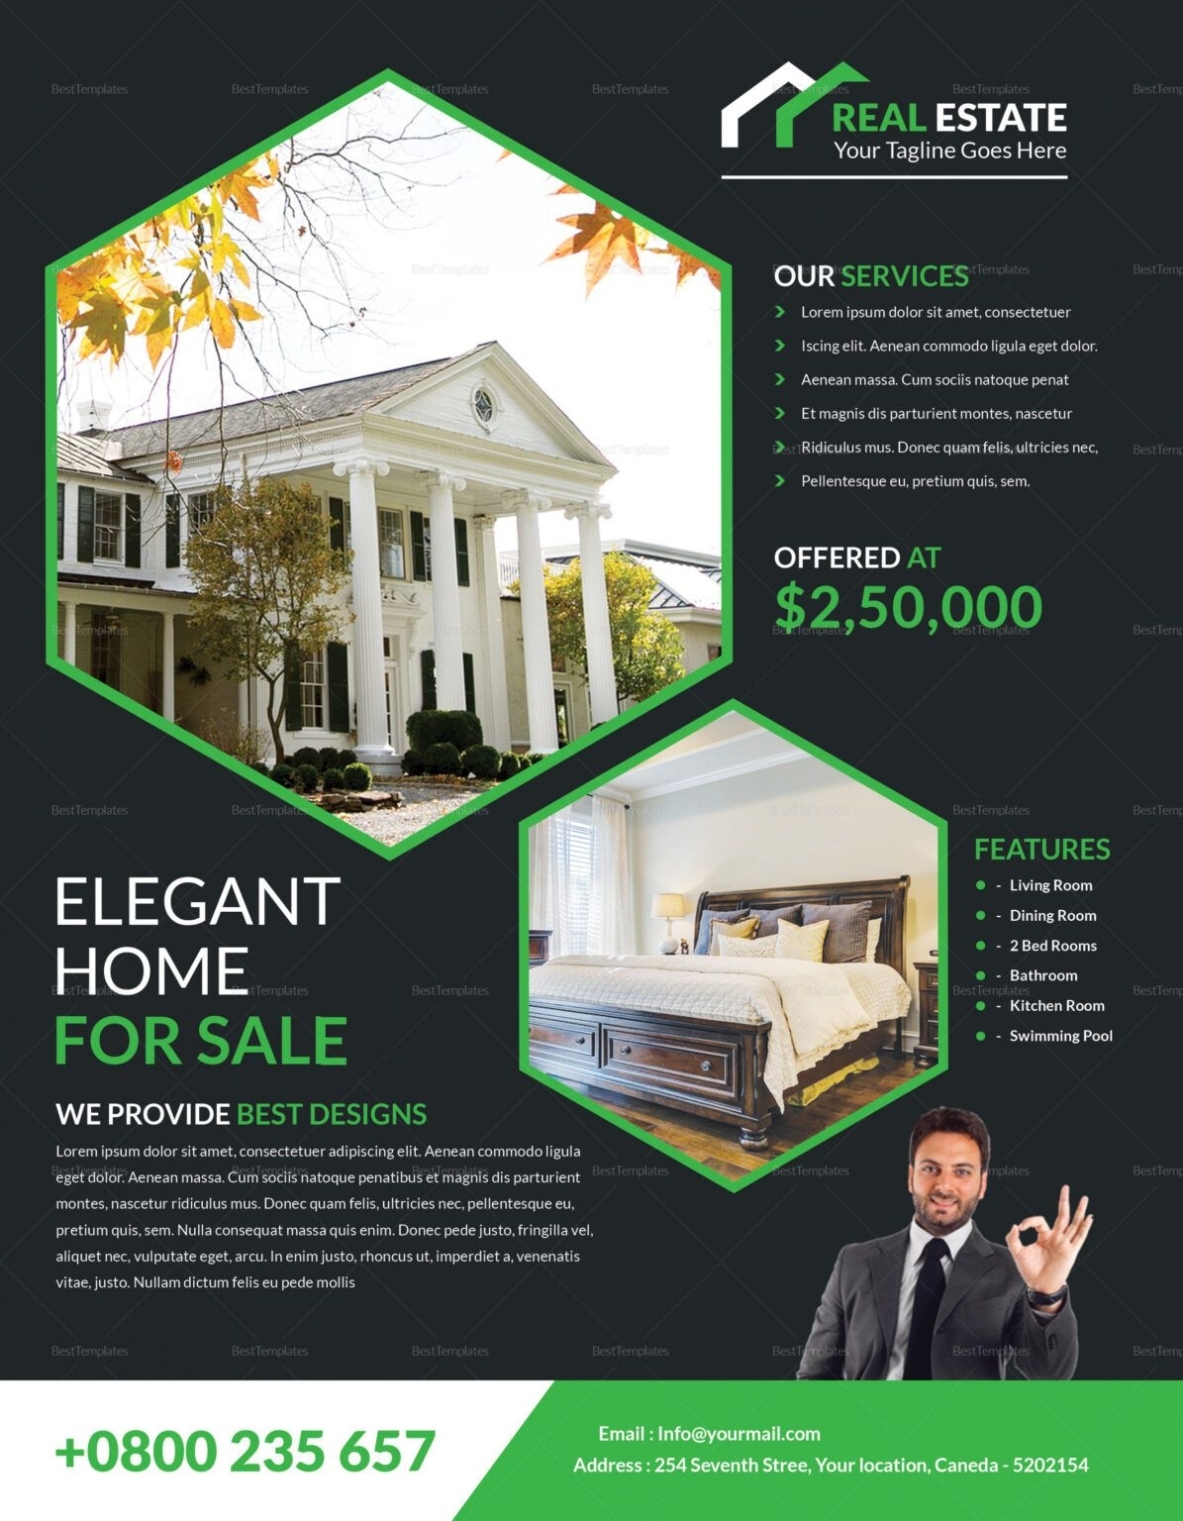 Free Real Estate Listing Flyer Template | Dremelmicro Intended For Free Real Estate Flyer Templates Download